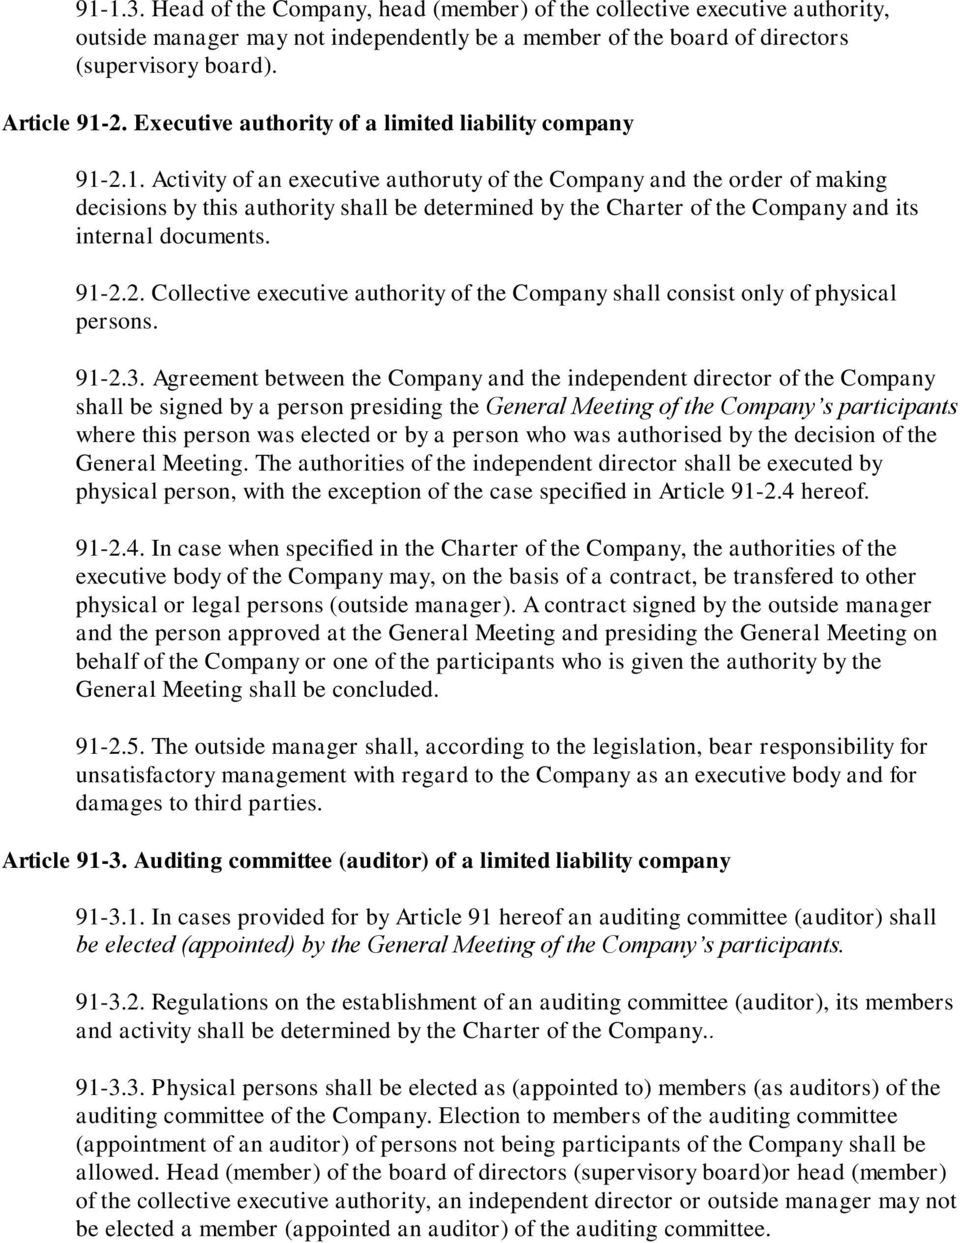 2.1. Activity of an executive authoruty of the Company and the order of making decisions by this authority shall be determined by the Charter of the Company and its internal documents. 91-2.2. Collective executive authority of the Company shall consist only of physical persons.